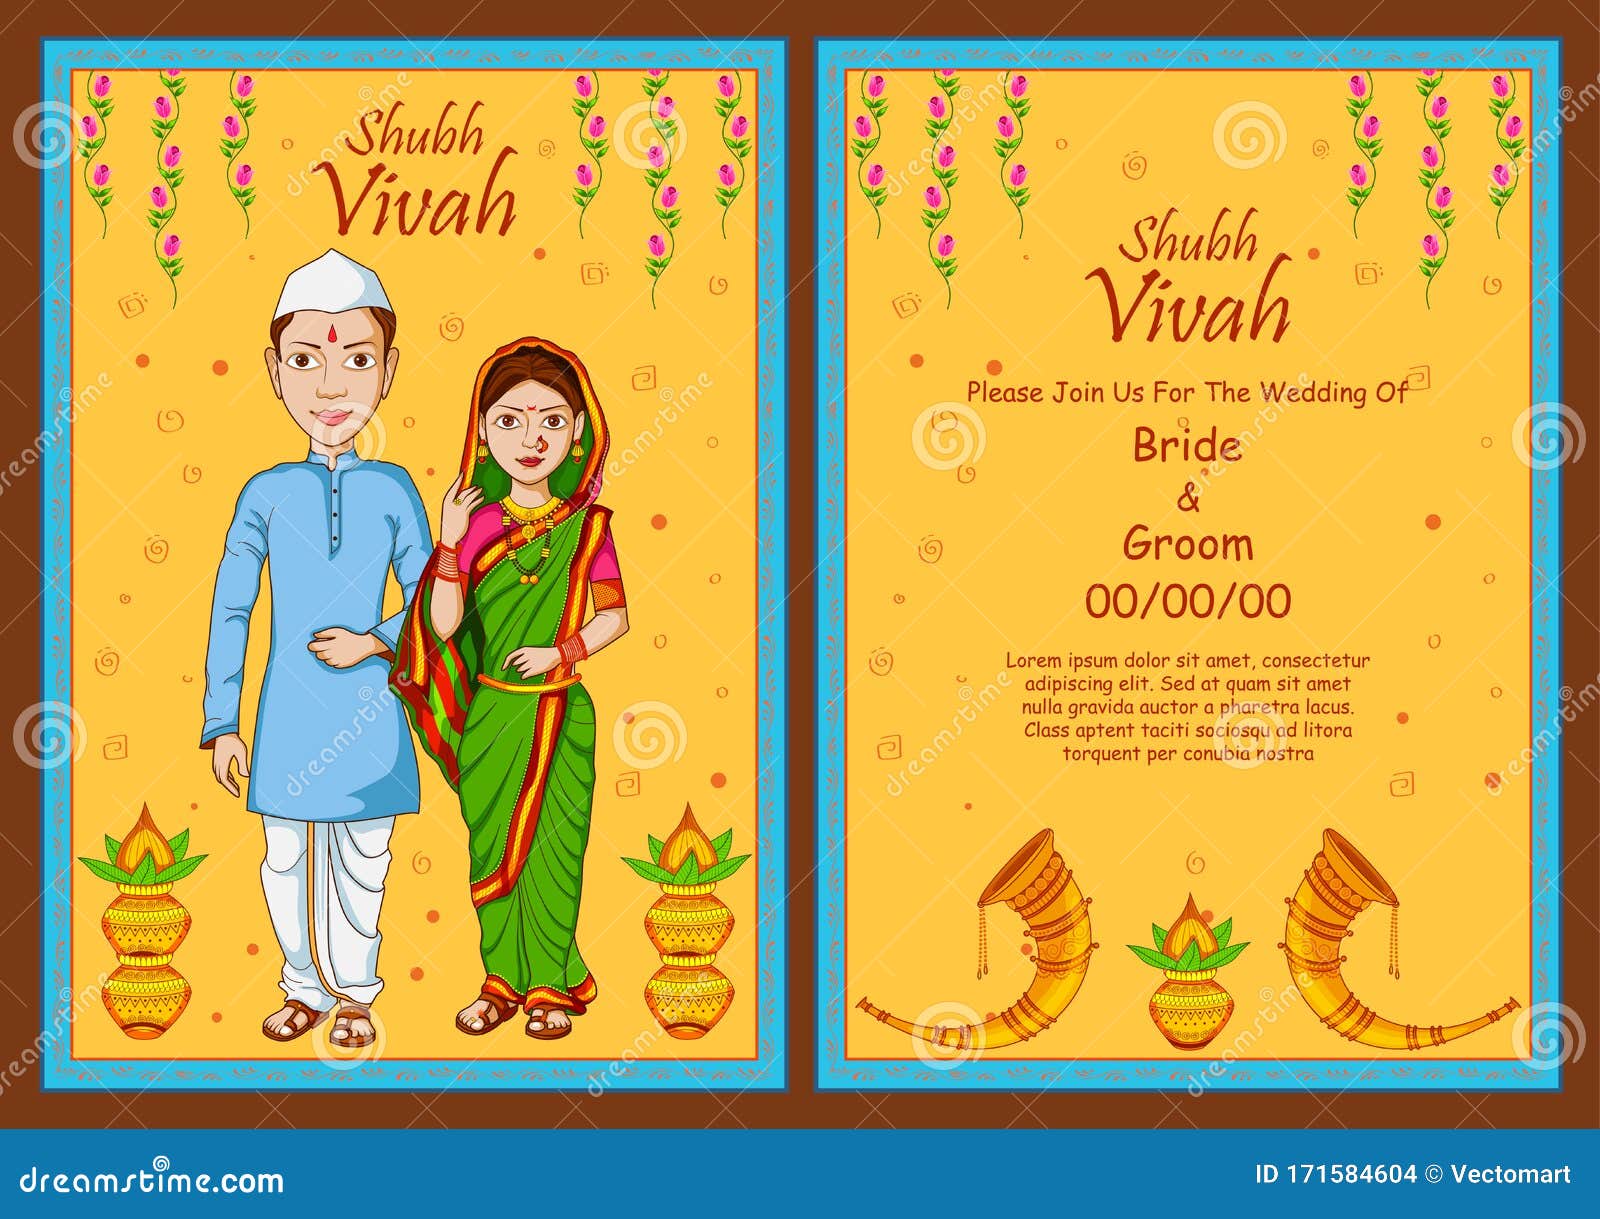 couple on indian wedding invitation template background stock